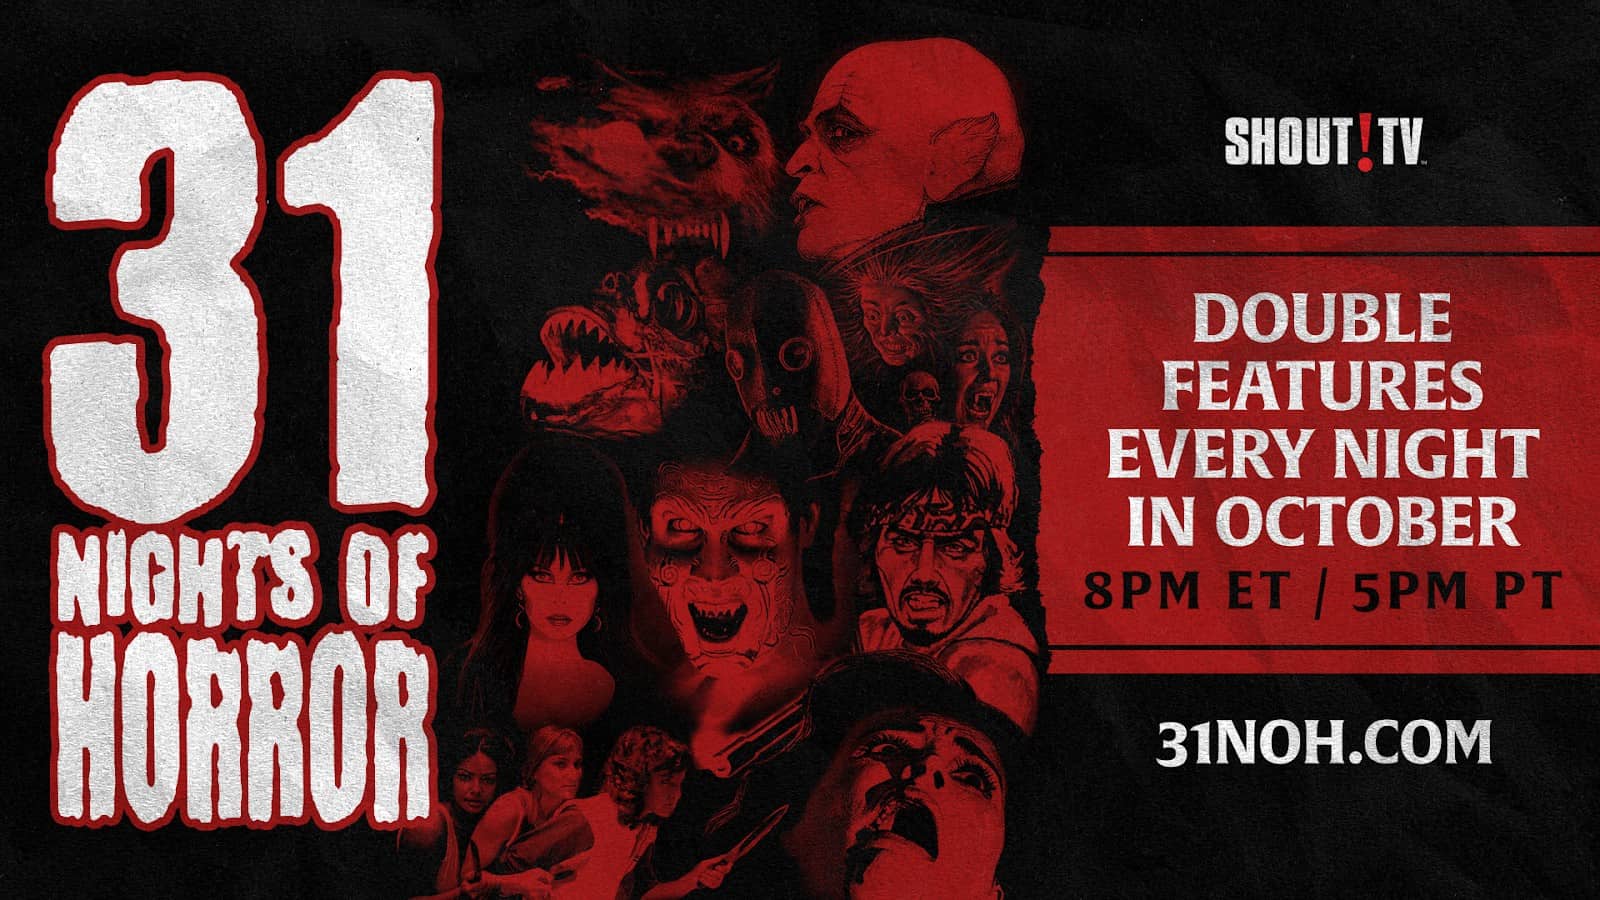 Shout! TV Unleashes 31 Nights of Horror Streaming Marathon - Check Out the Chiller Lineup 60